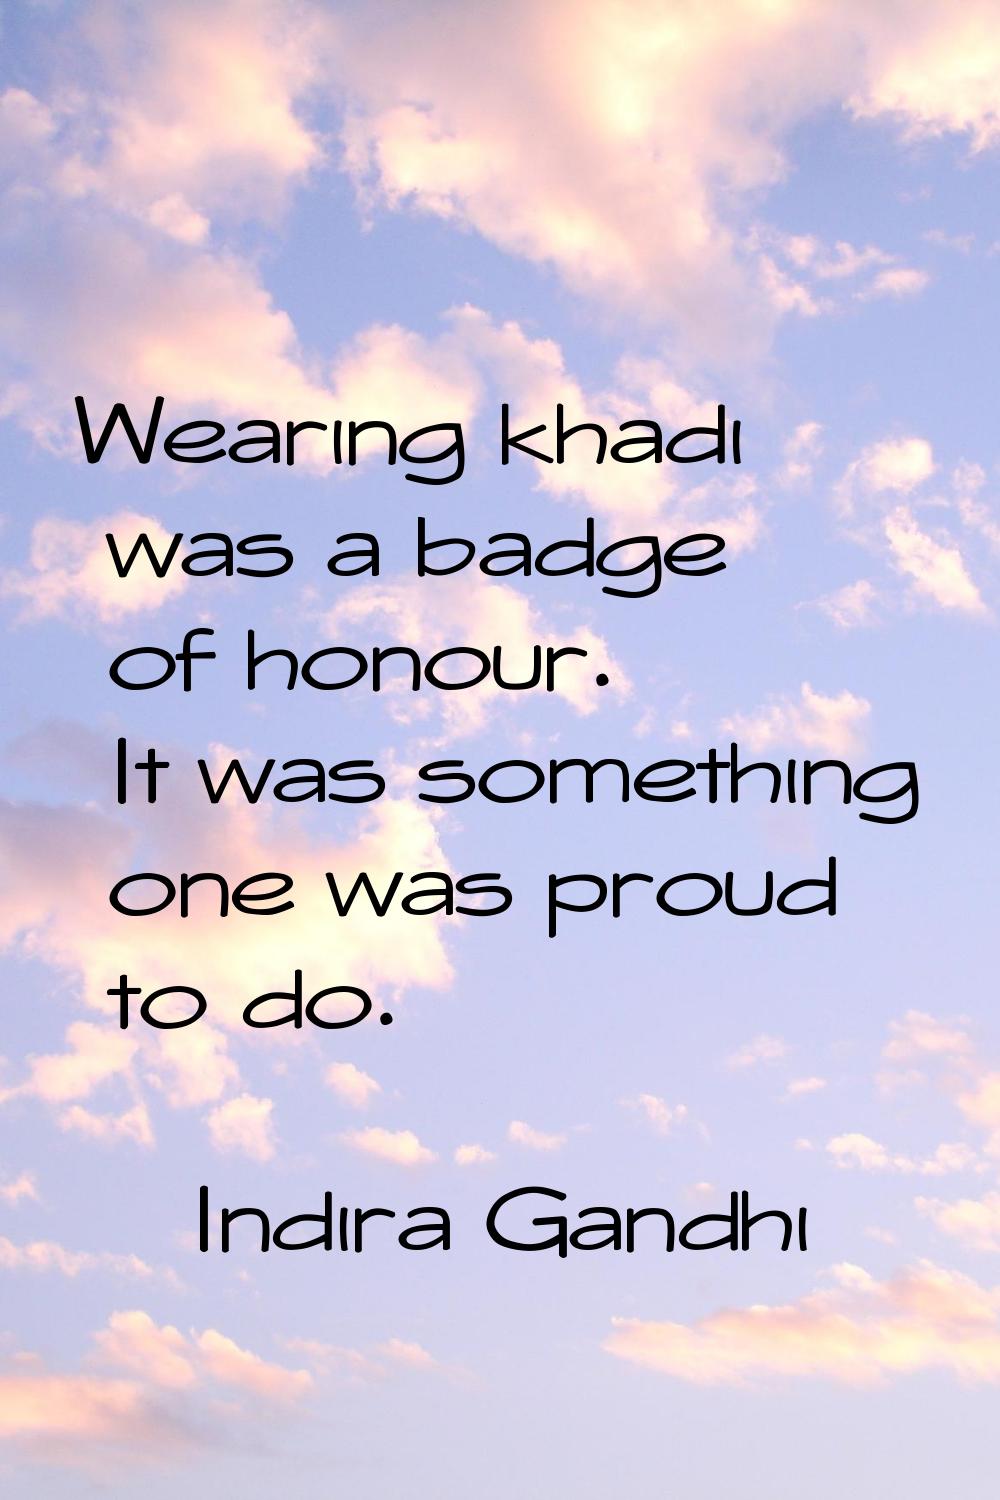 Wearing khadi was a badge of honour. It was something one was proud to do.